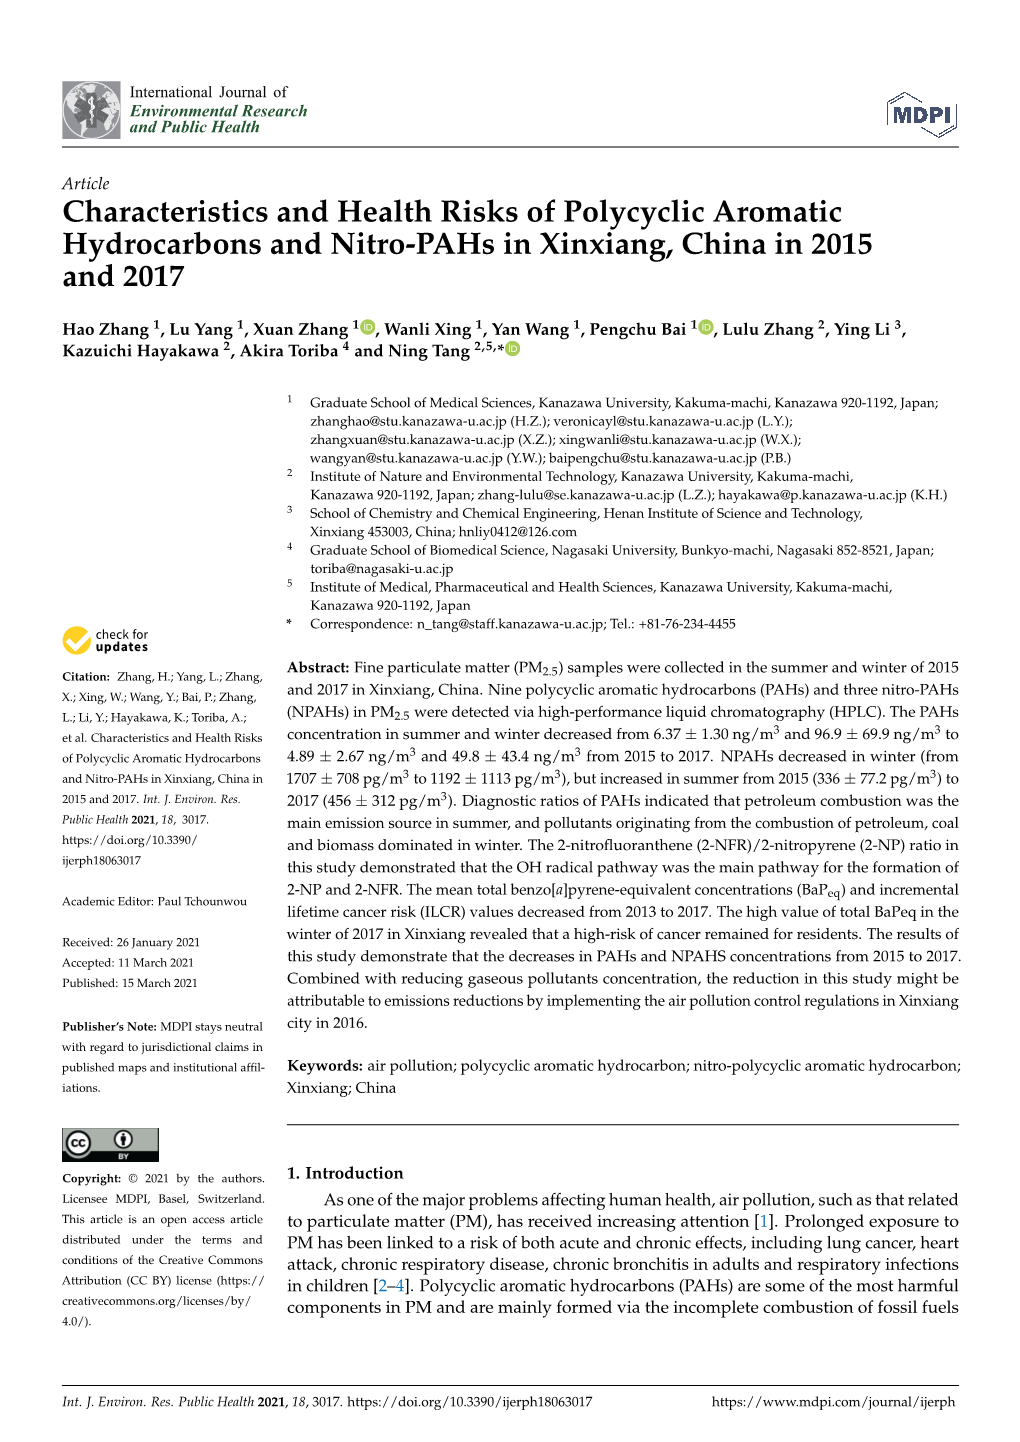 Characteristics and Health Risks of Polycyclic Aromatic Hydrocarbons and Nitro-Pahs in Xinxiang, China in 2015 and 2017